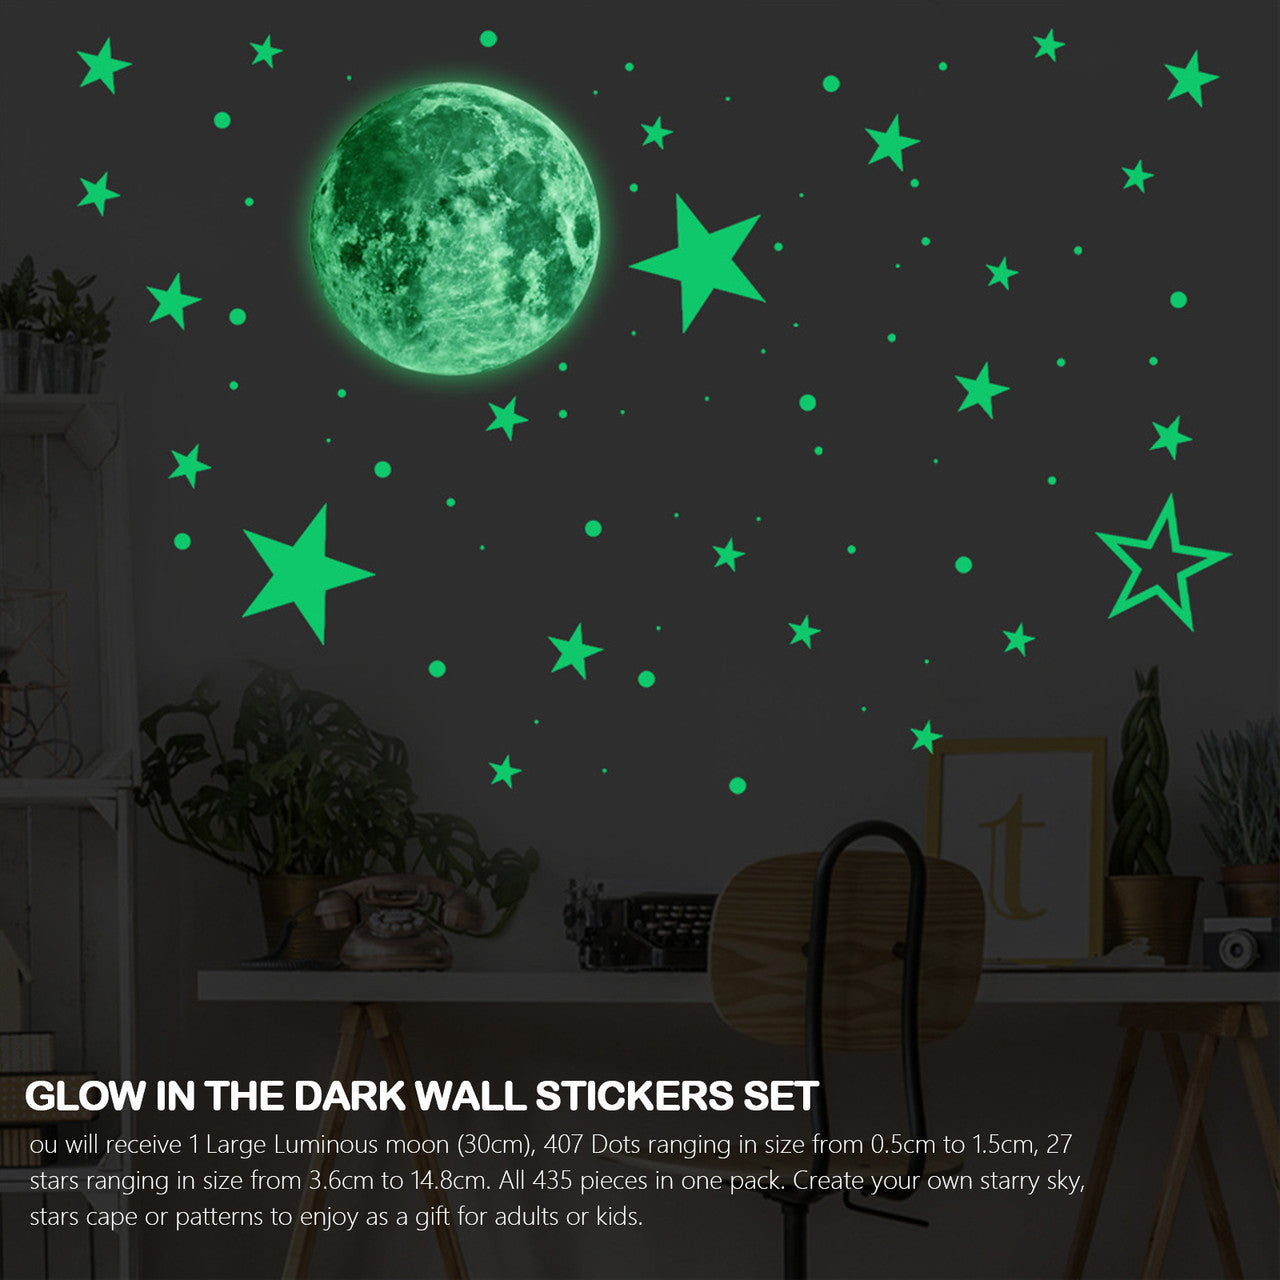 Adhesive Bright Glowing Dot and Realistic Stars and Full Moon for Starry Sky, Shining Decoration for Girls and Boys, Beautiful Wall Decals, 435pcs